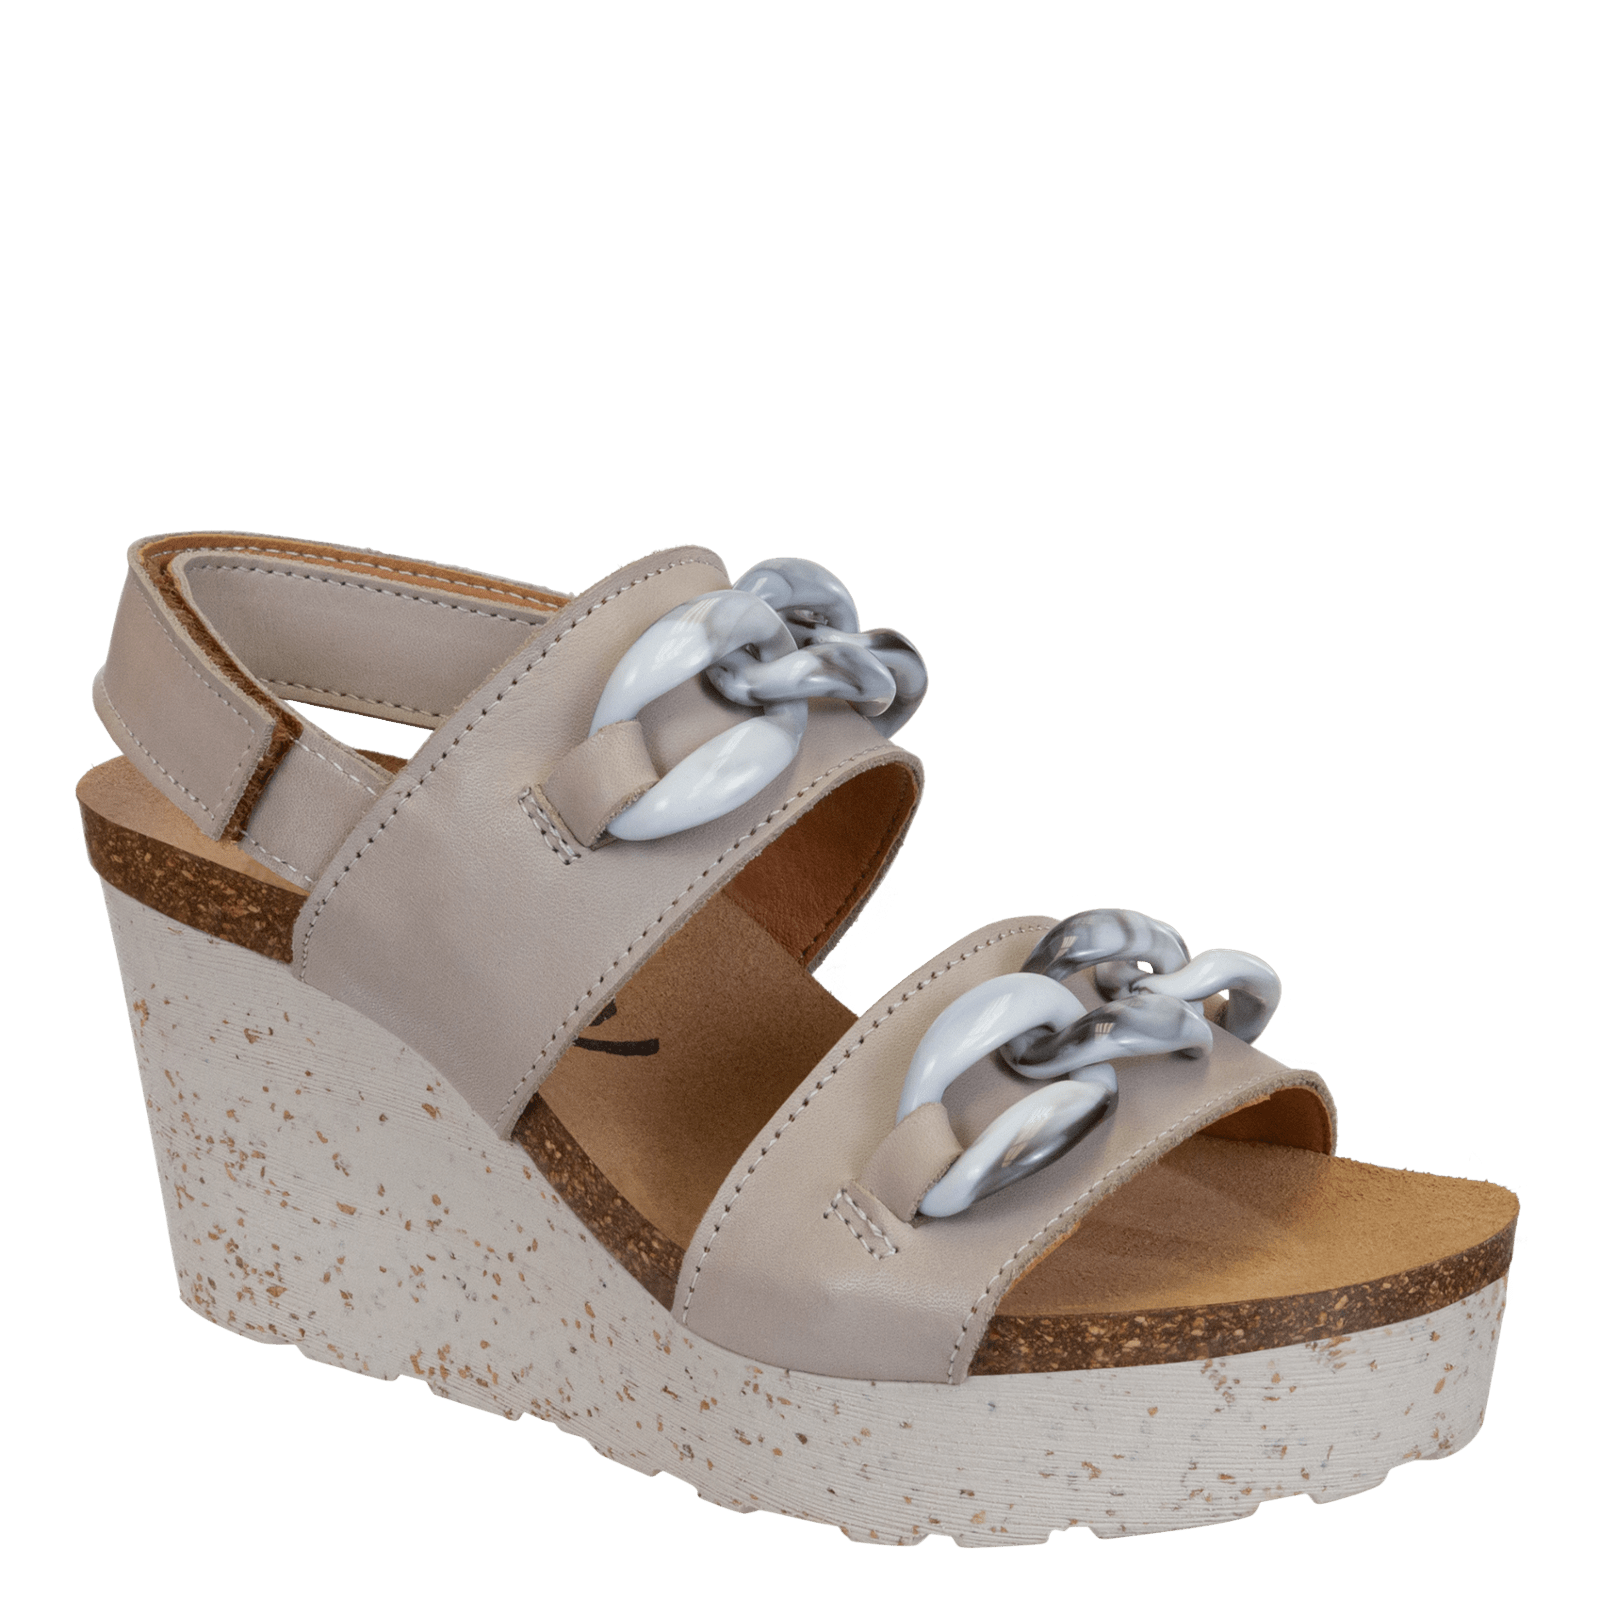 EHQJNJ Female Women's Sandals Comfortable Bohemian Style and Comfortable  Shoes with Medium Length Heel Outdoor Shoes Wedge Sandals Women Comfortable